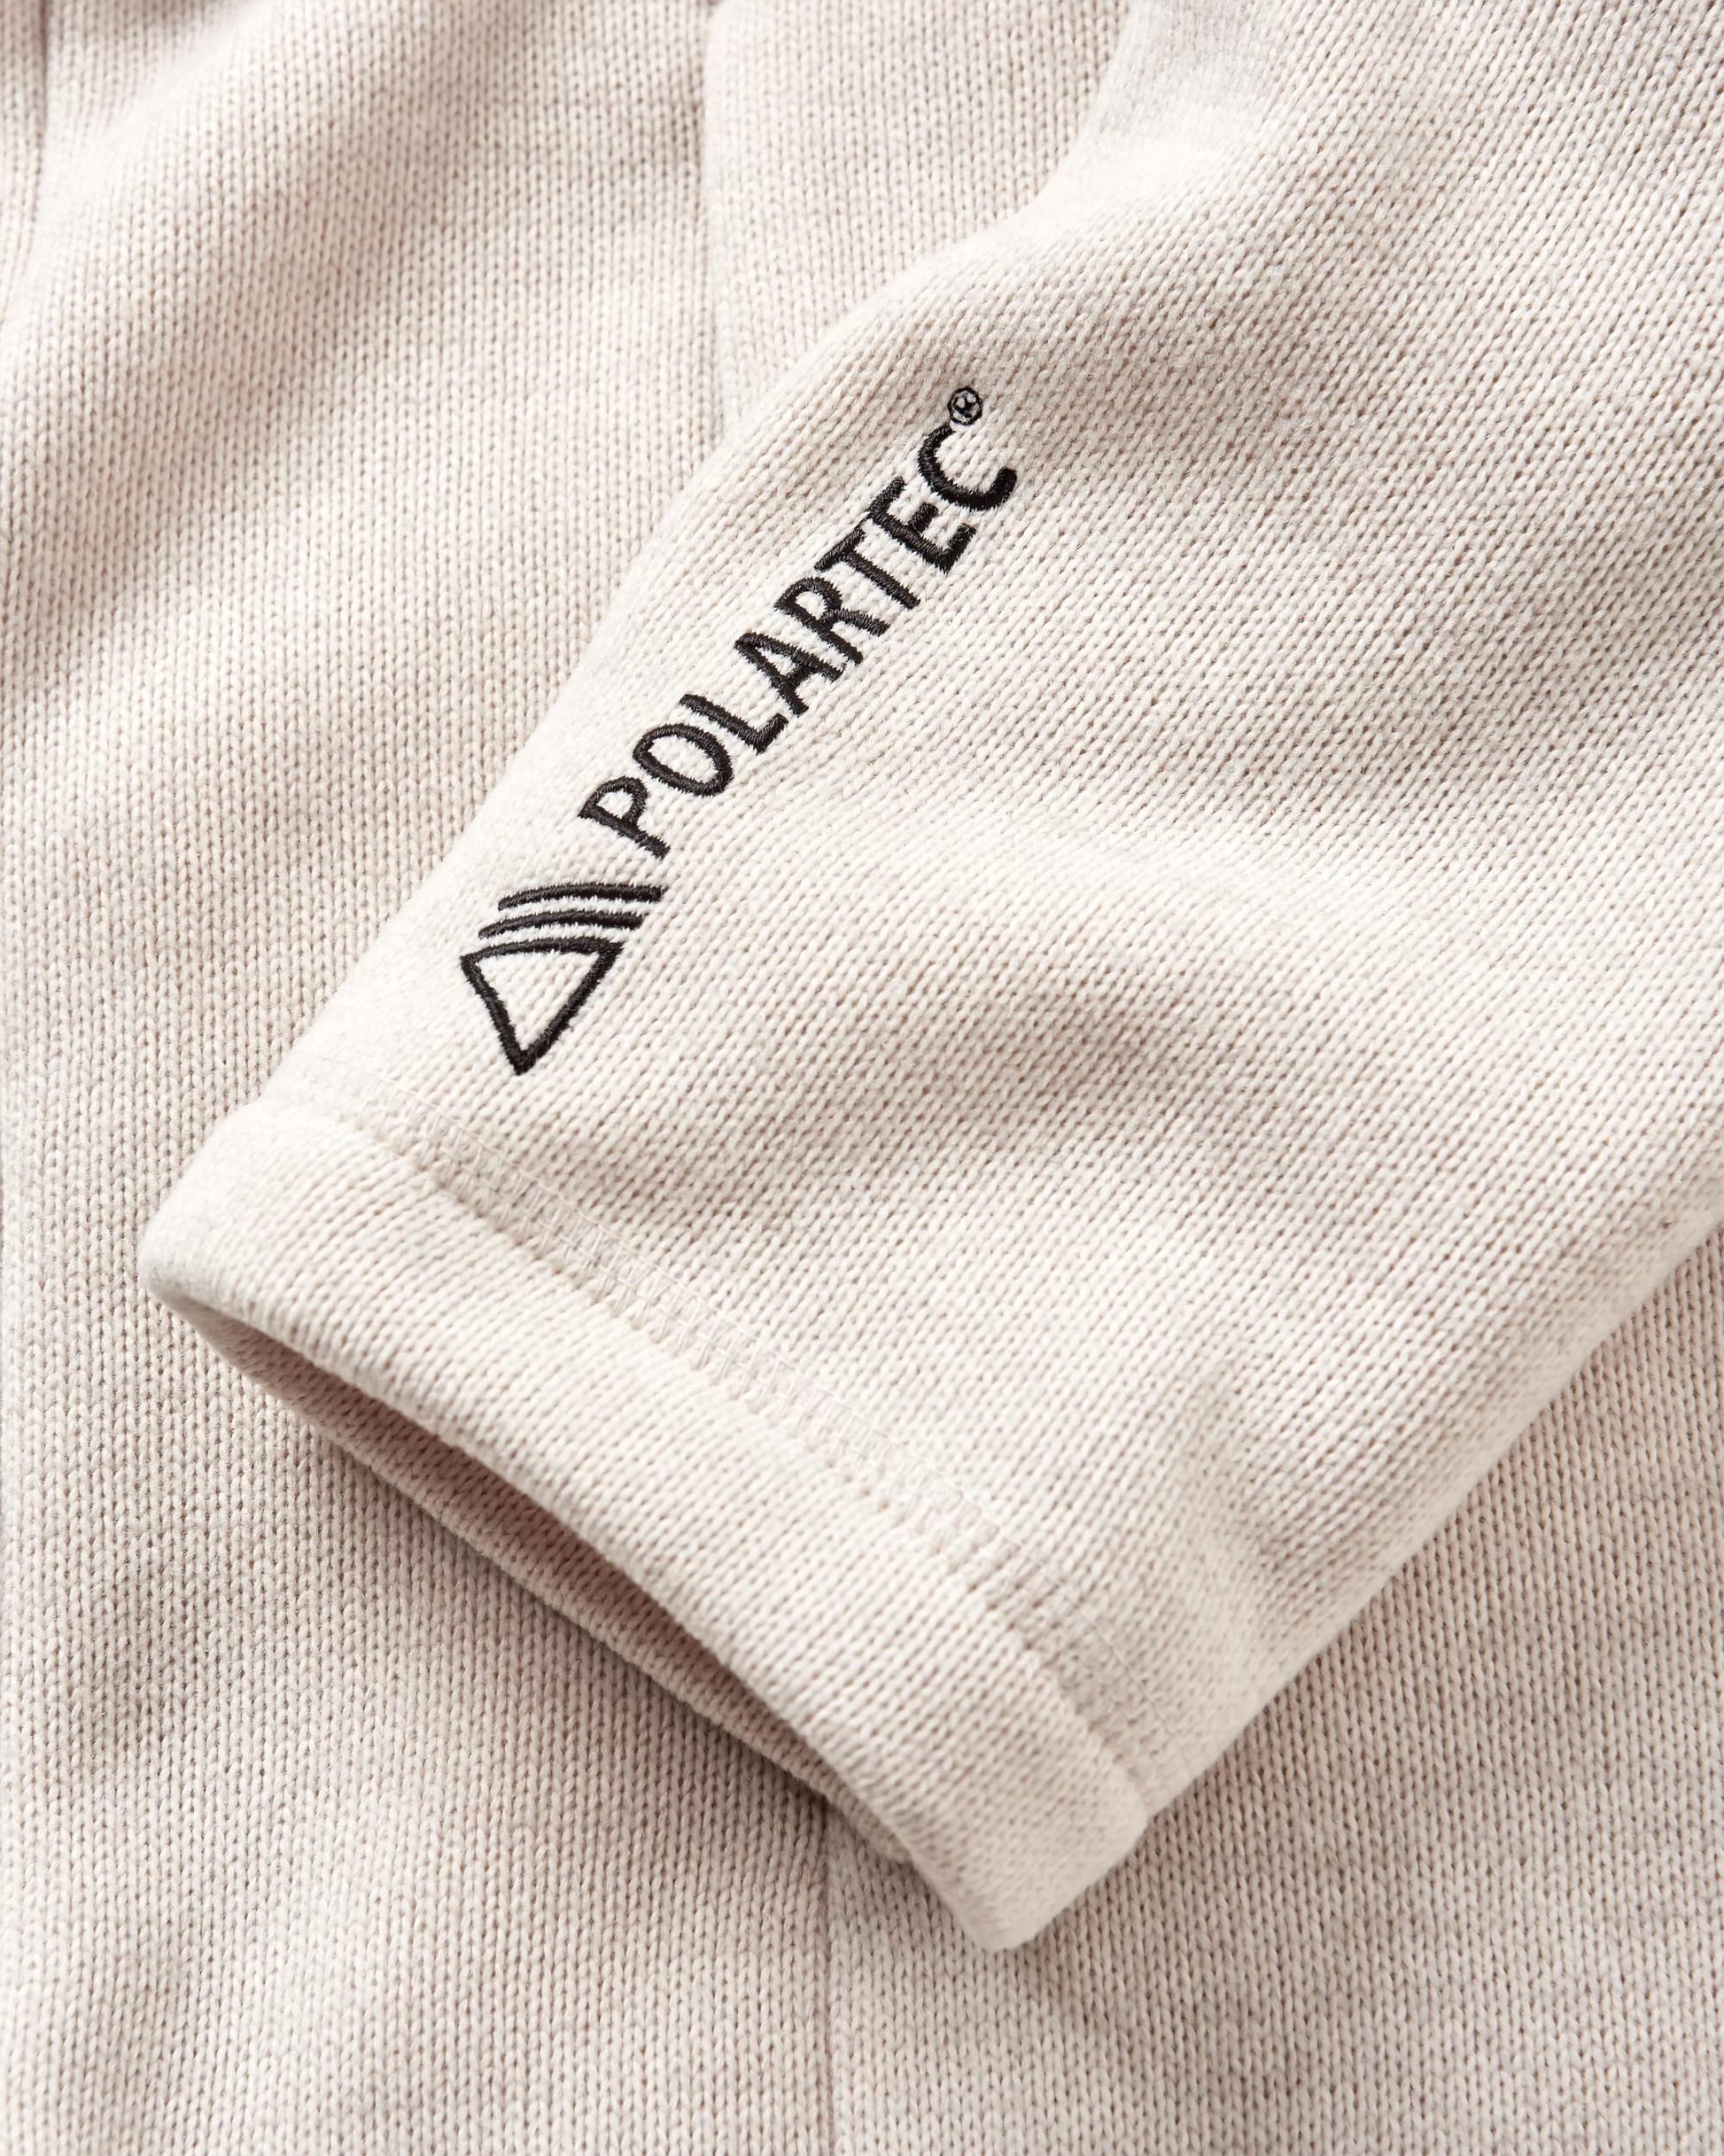 Incline Recycled Sherpa Fleece - Vintage White